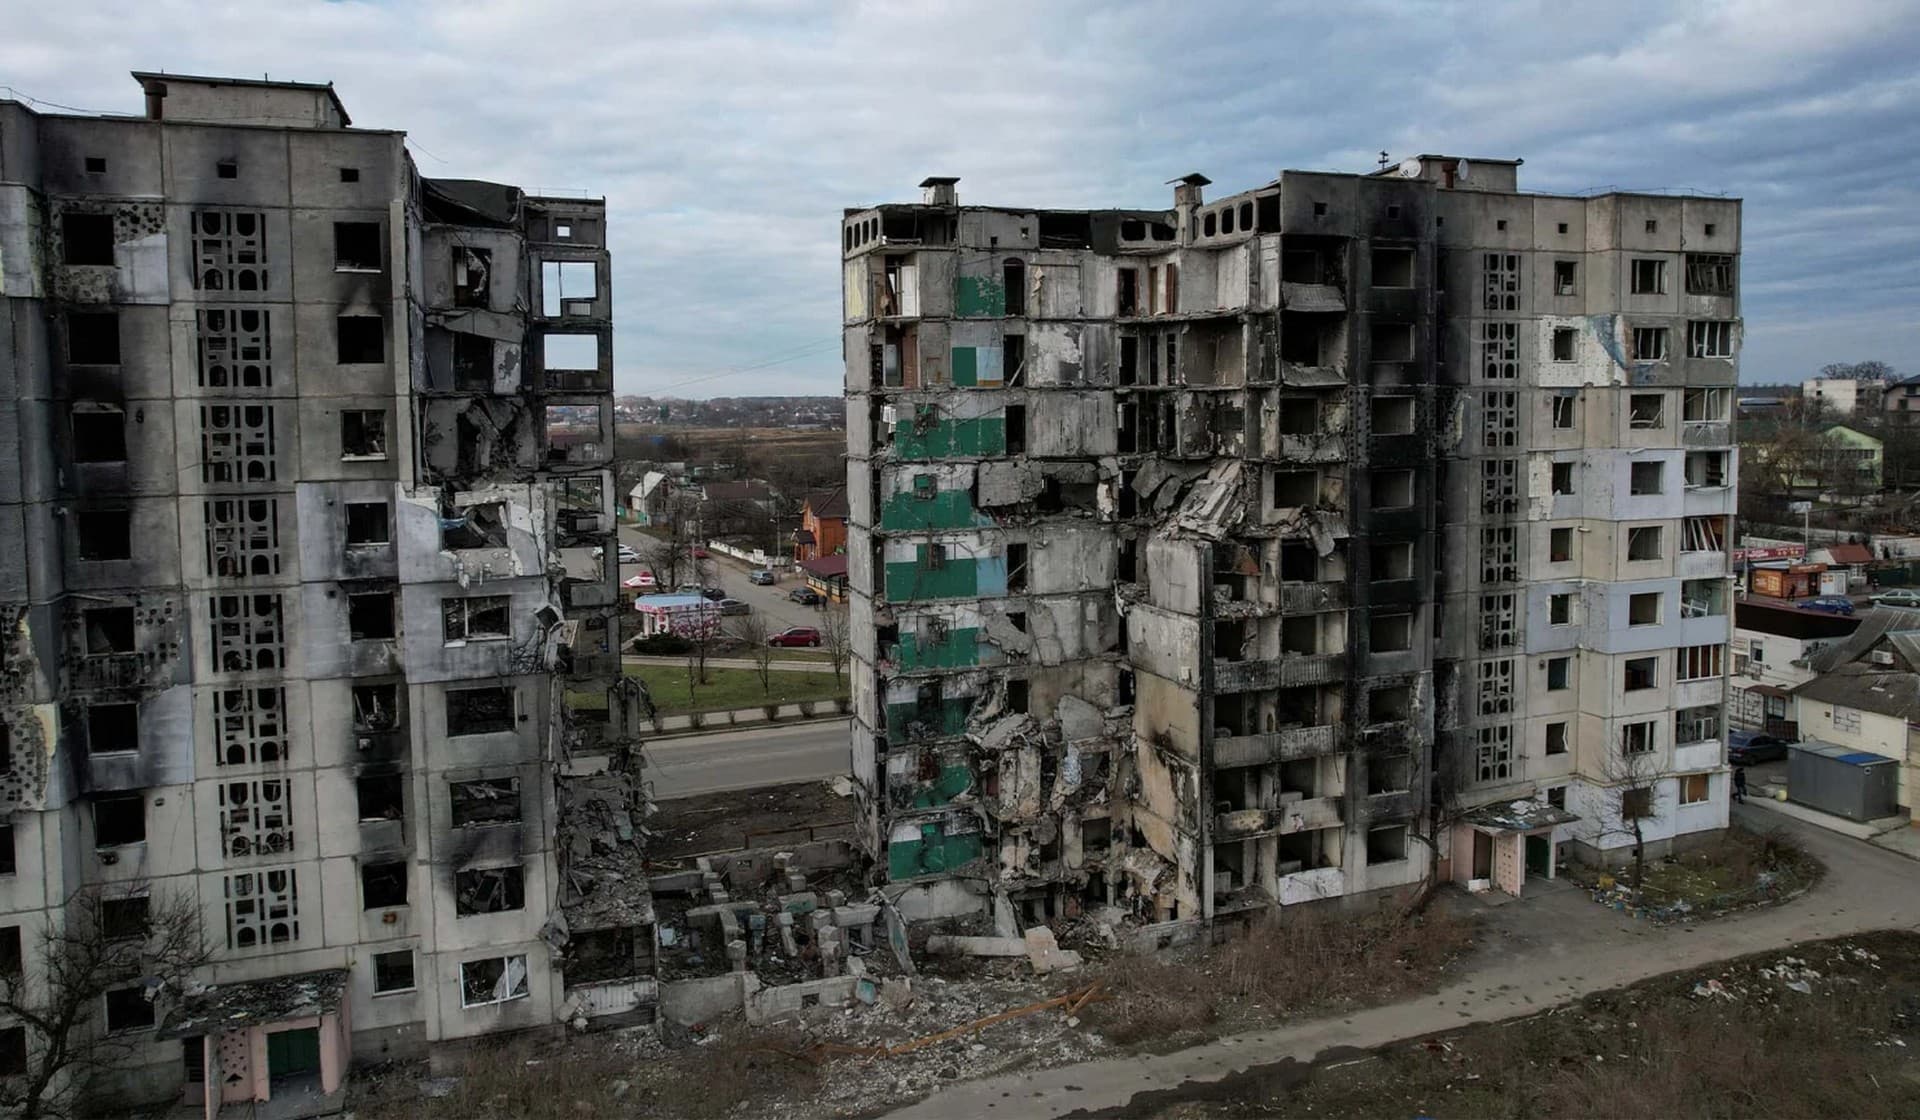 A general view of a heavily damaged building outside of Kyiv